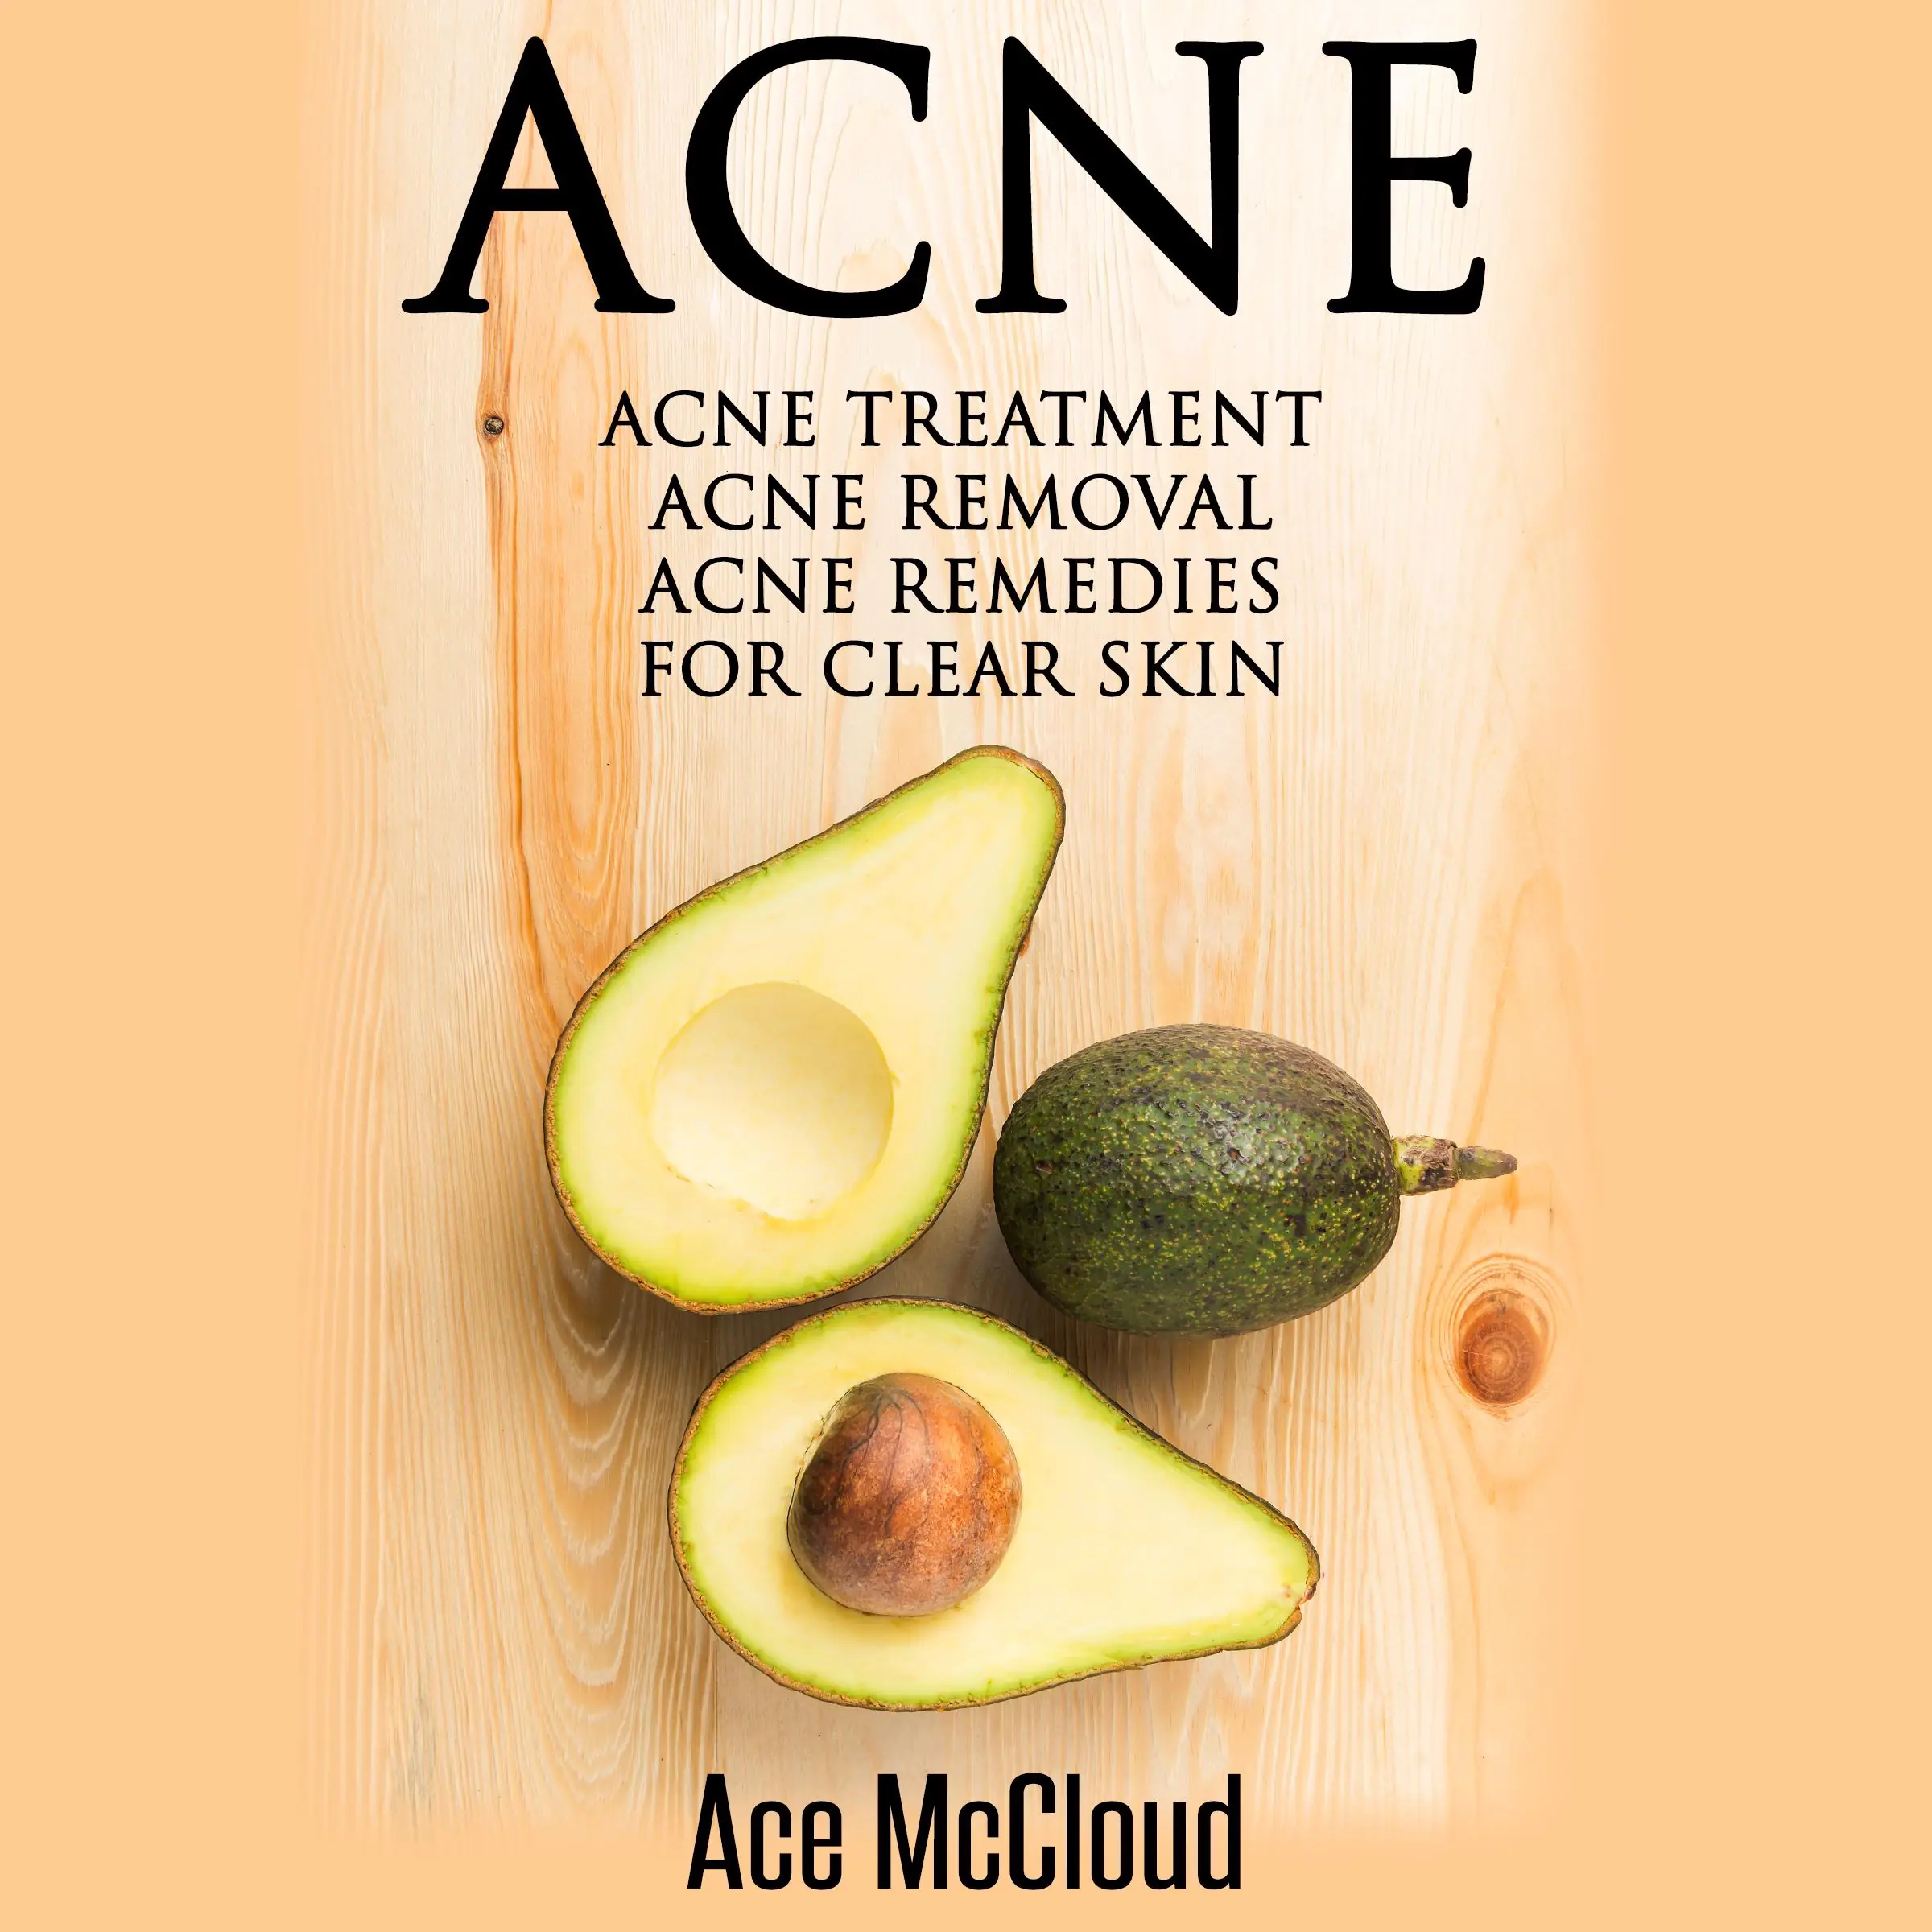 Acne: Acne Treatment: Acne Removal: Acne Remedies For Clear Skin Audiobook by Ace McCloud